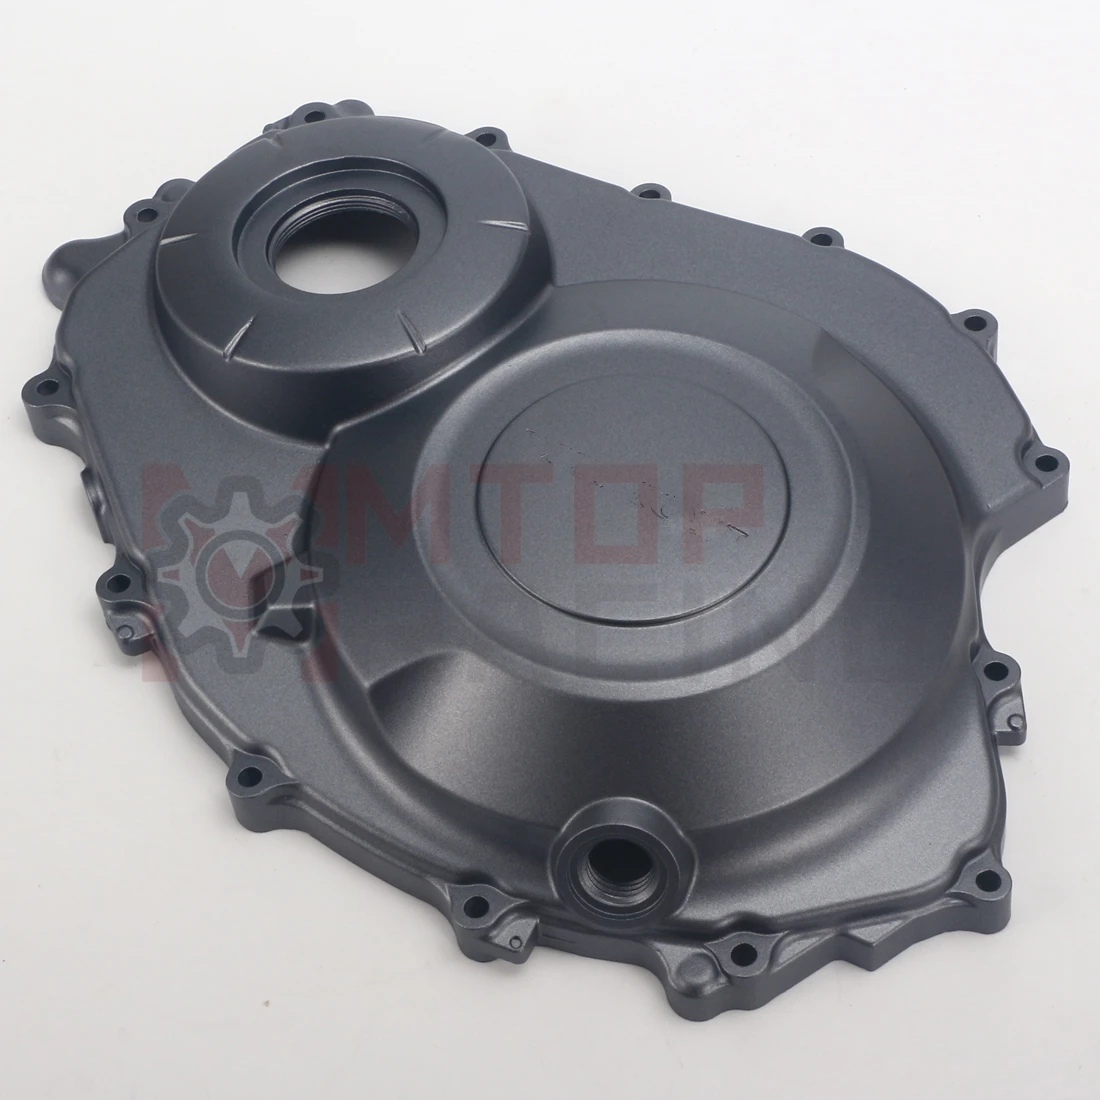 

OEM Motorcycle Right Side Clutch Case Crankcase Cover For Honda CB1000R 2011 2012 2013 2014 2015 2016 11330-MFN-D00 Original